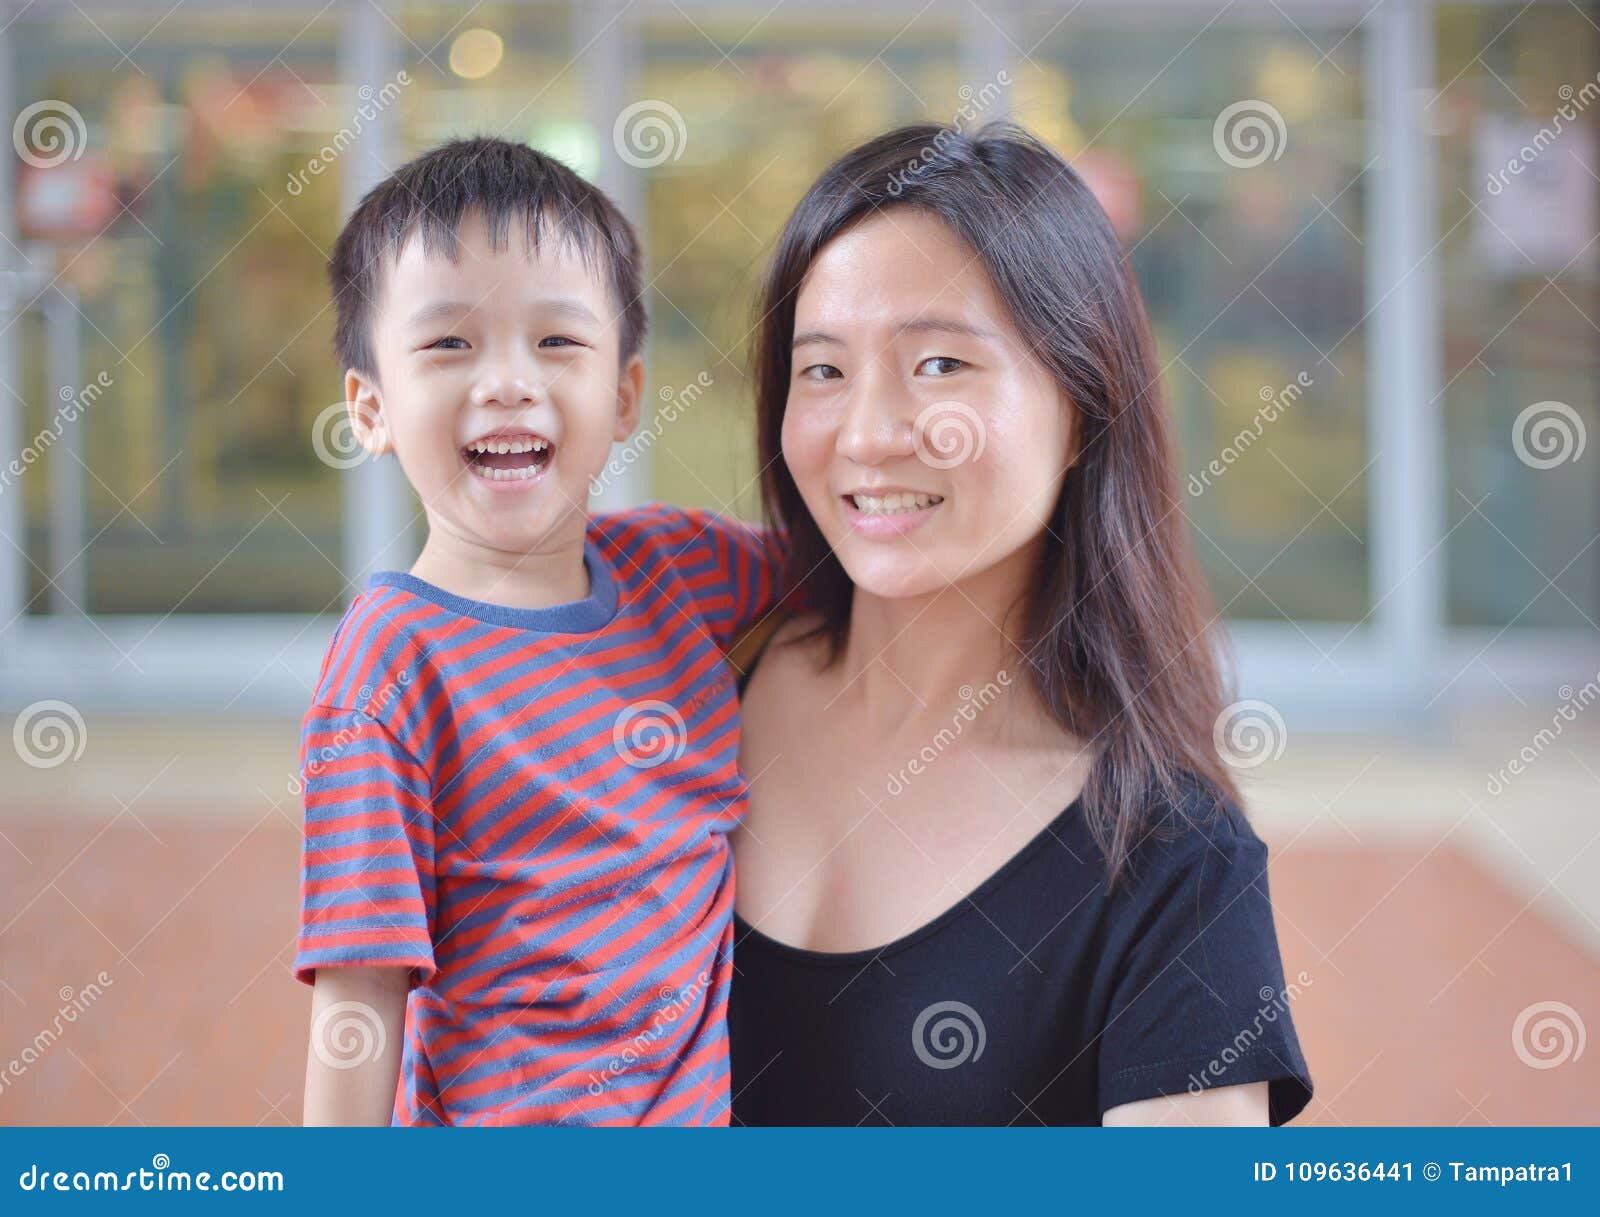 mothers Young photo asian